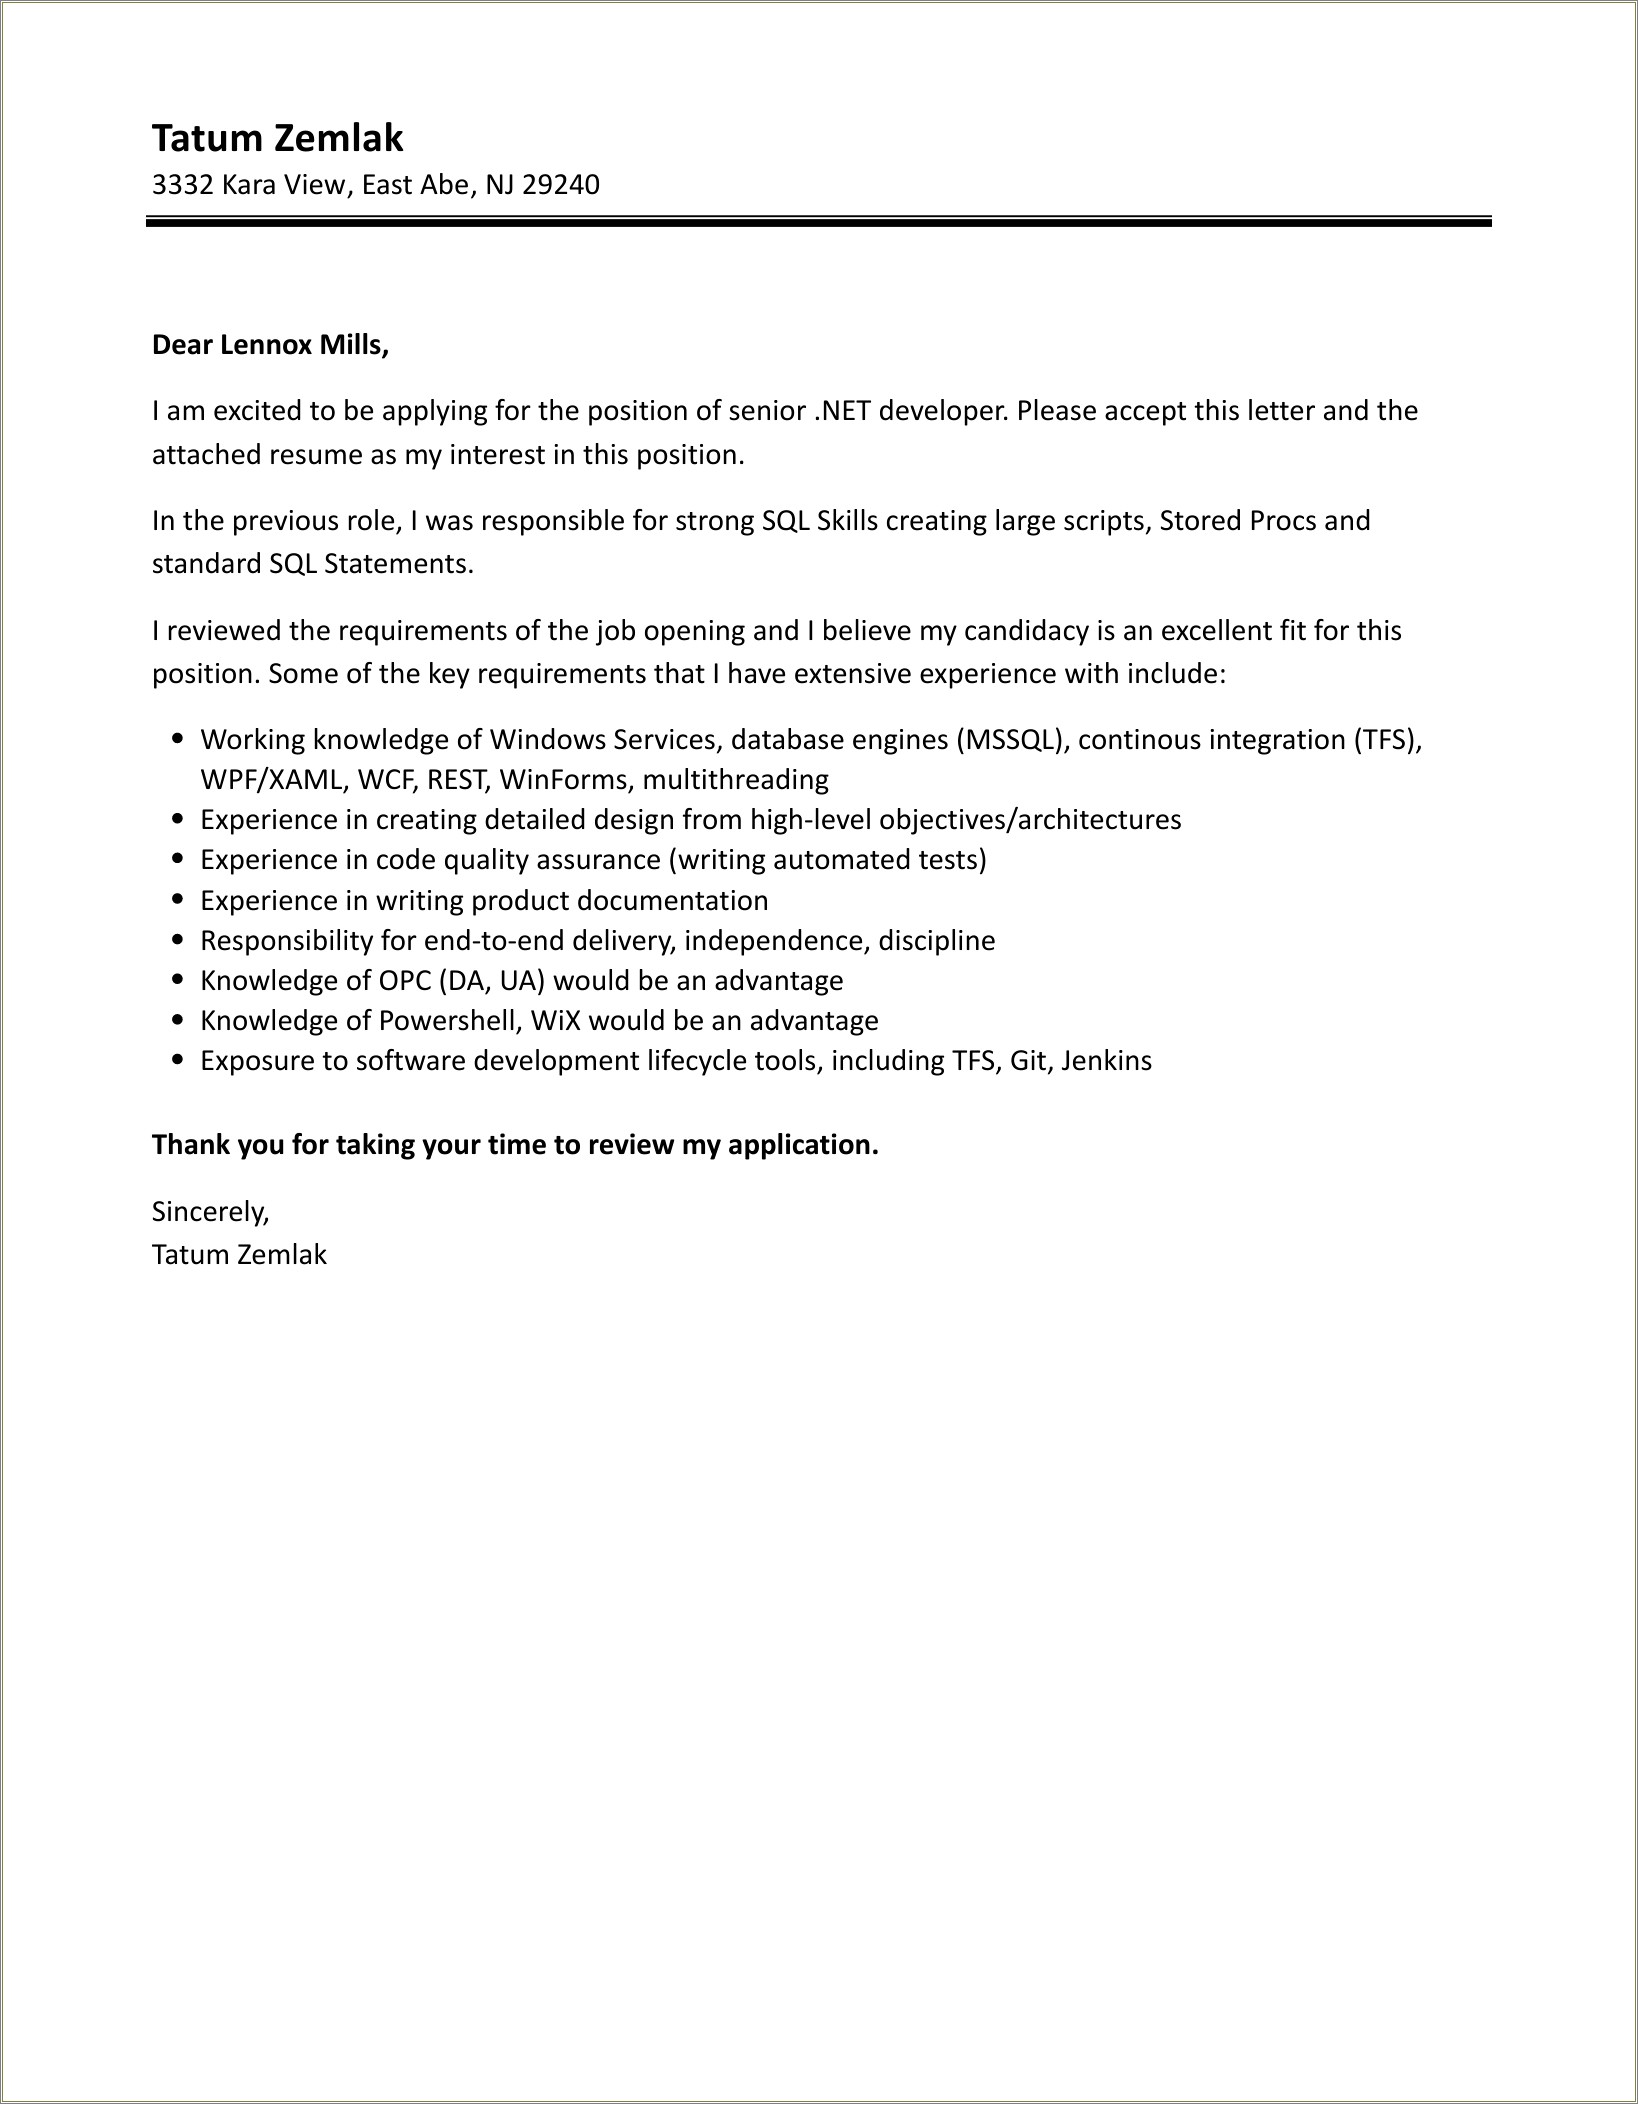 Sample Cover Letters For Resumes On Net